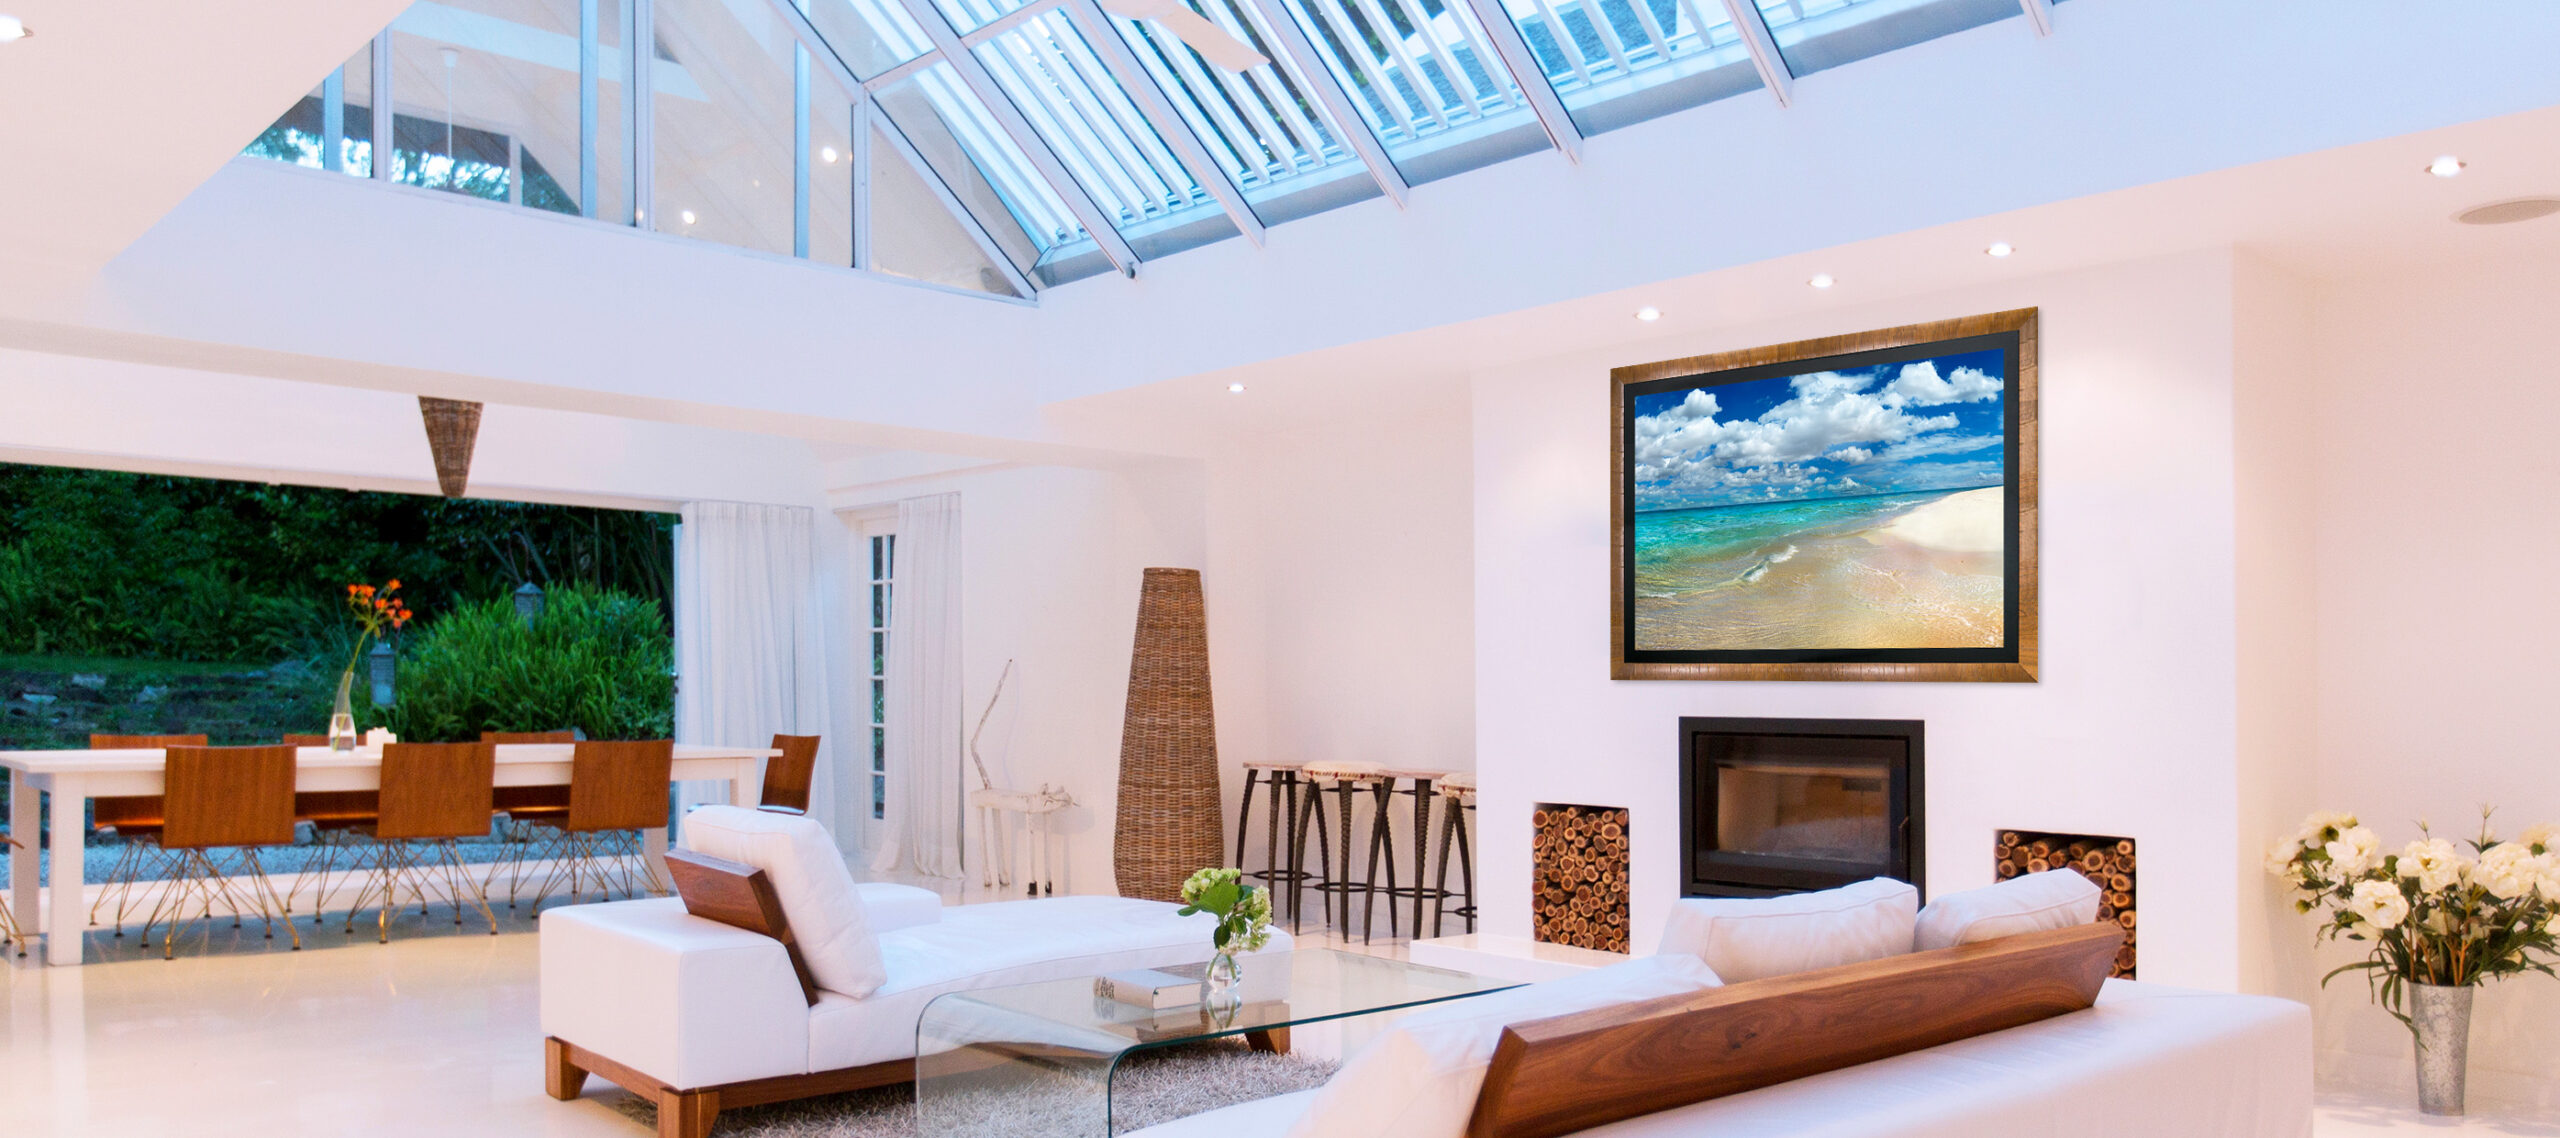 Sofas,,Fireplace,And,Skylights,In,Modern,Living,Room